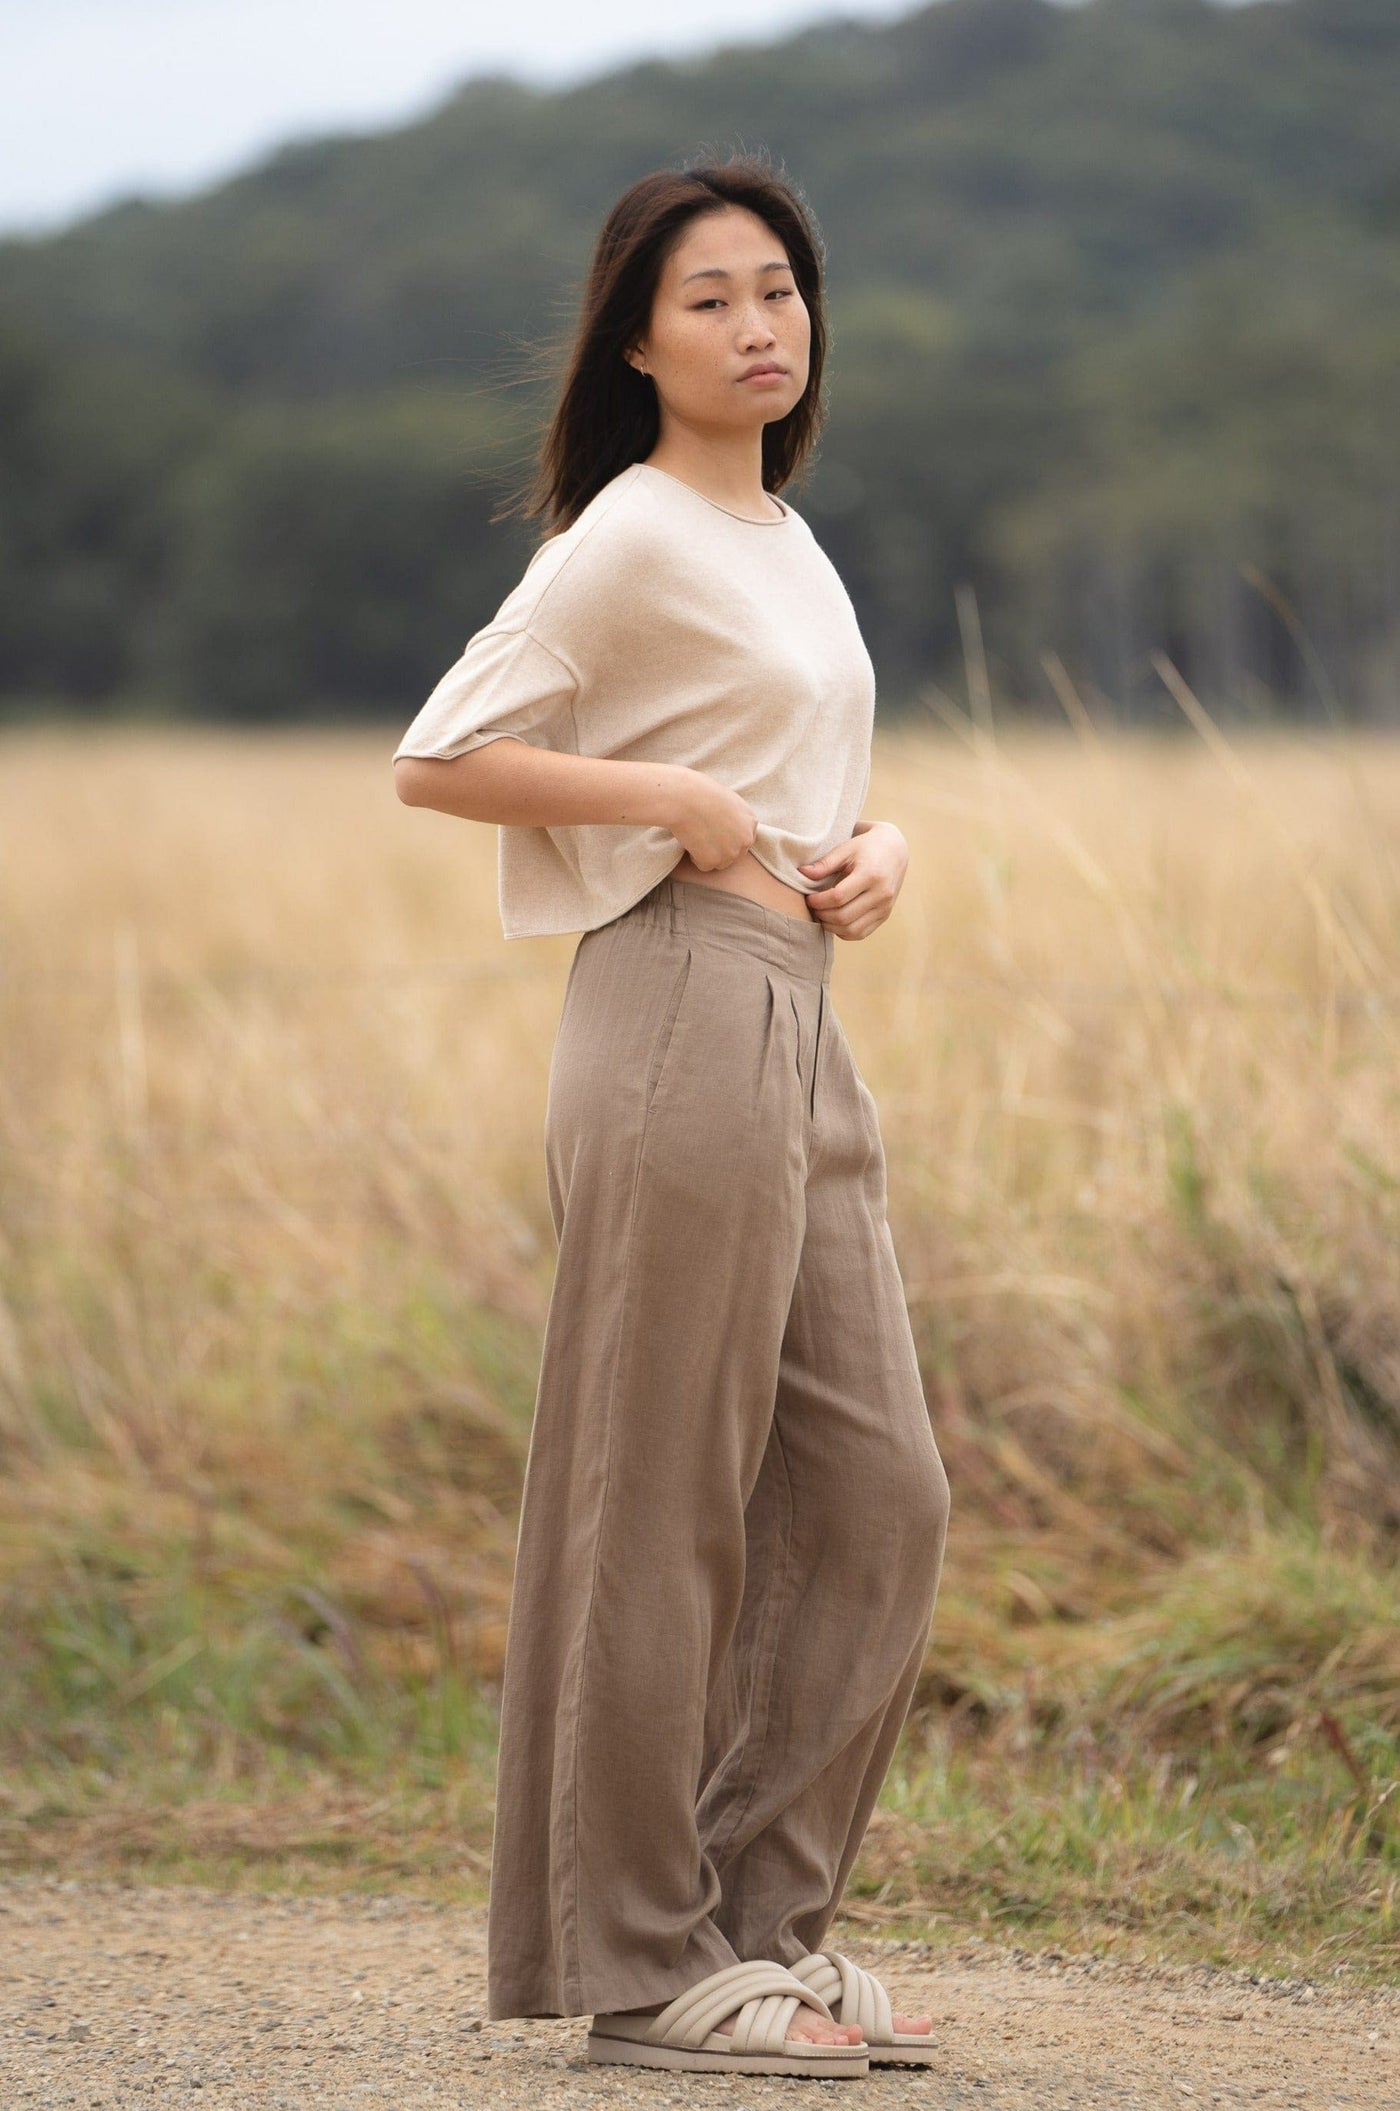 LILLY PILLY Addison Knit top made from Cotton Cashmere in Neutral colour